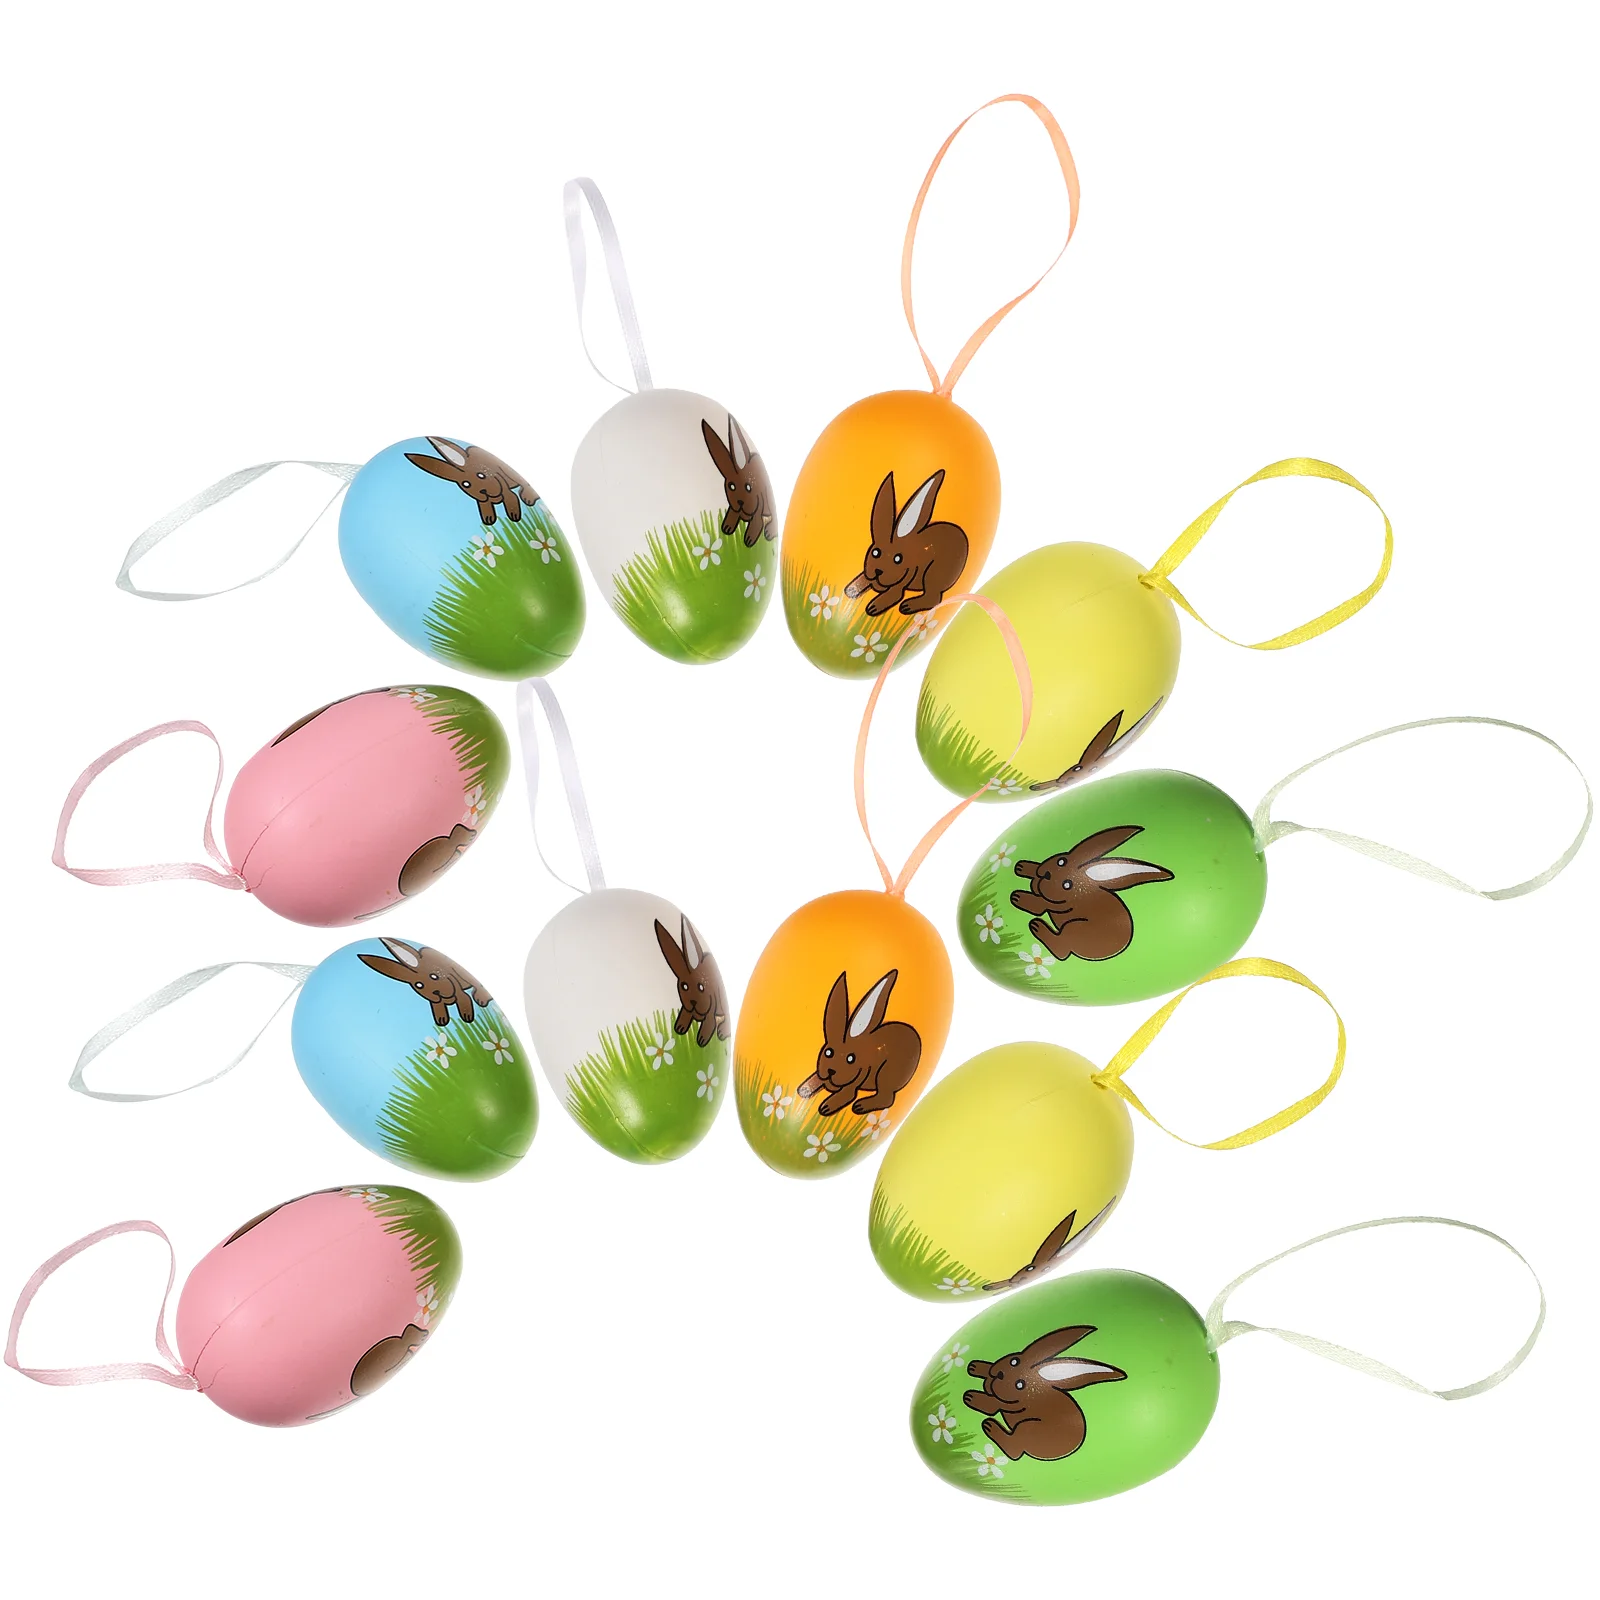 

Easter Egg Decorations Decoration Tree Eggs Hanging Pendant Party Ornaments Holiday Crafts Basket Favors Fillers Toys Craft